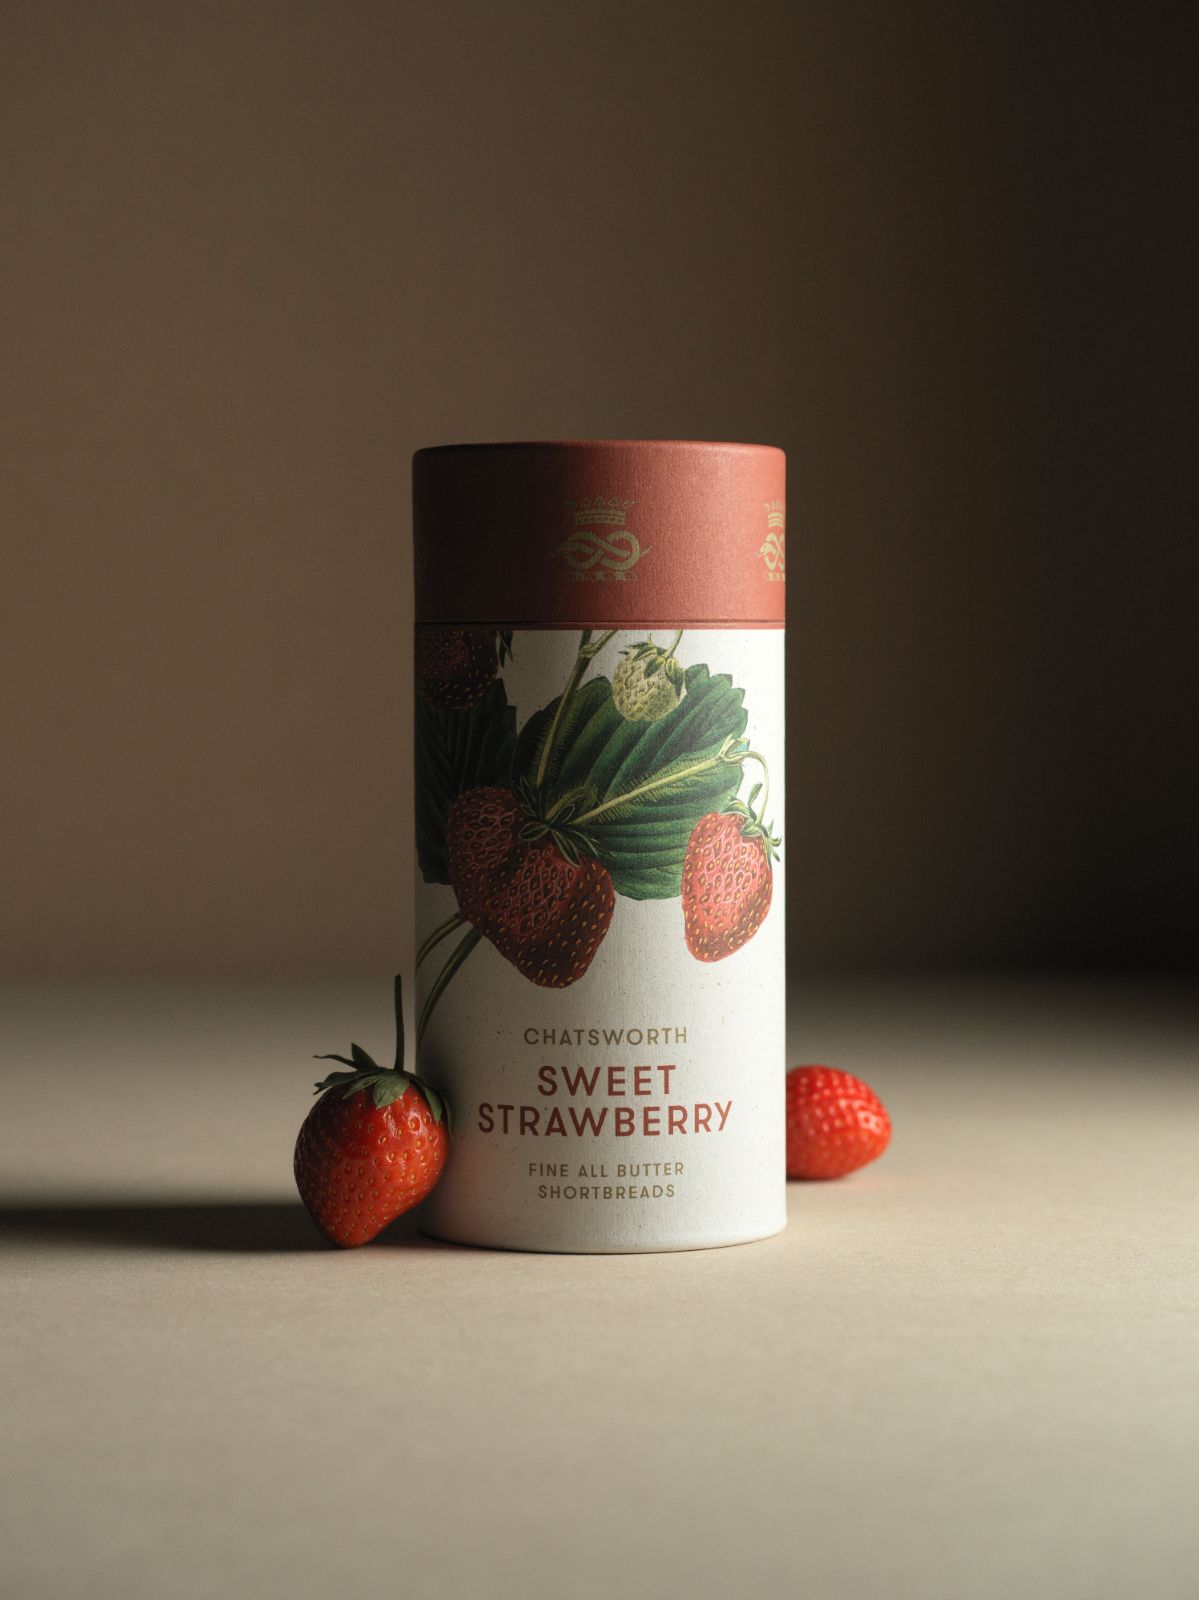 Strawberry Chatsworth Artisan Biscuits. Vertical packaging with botanical illustrations across the side.